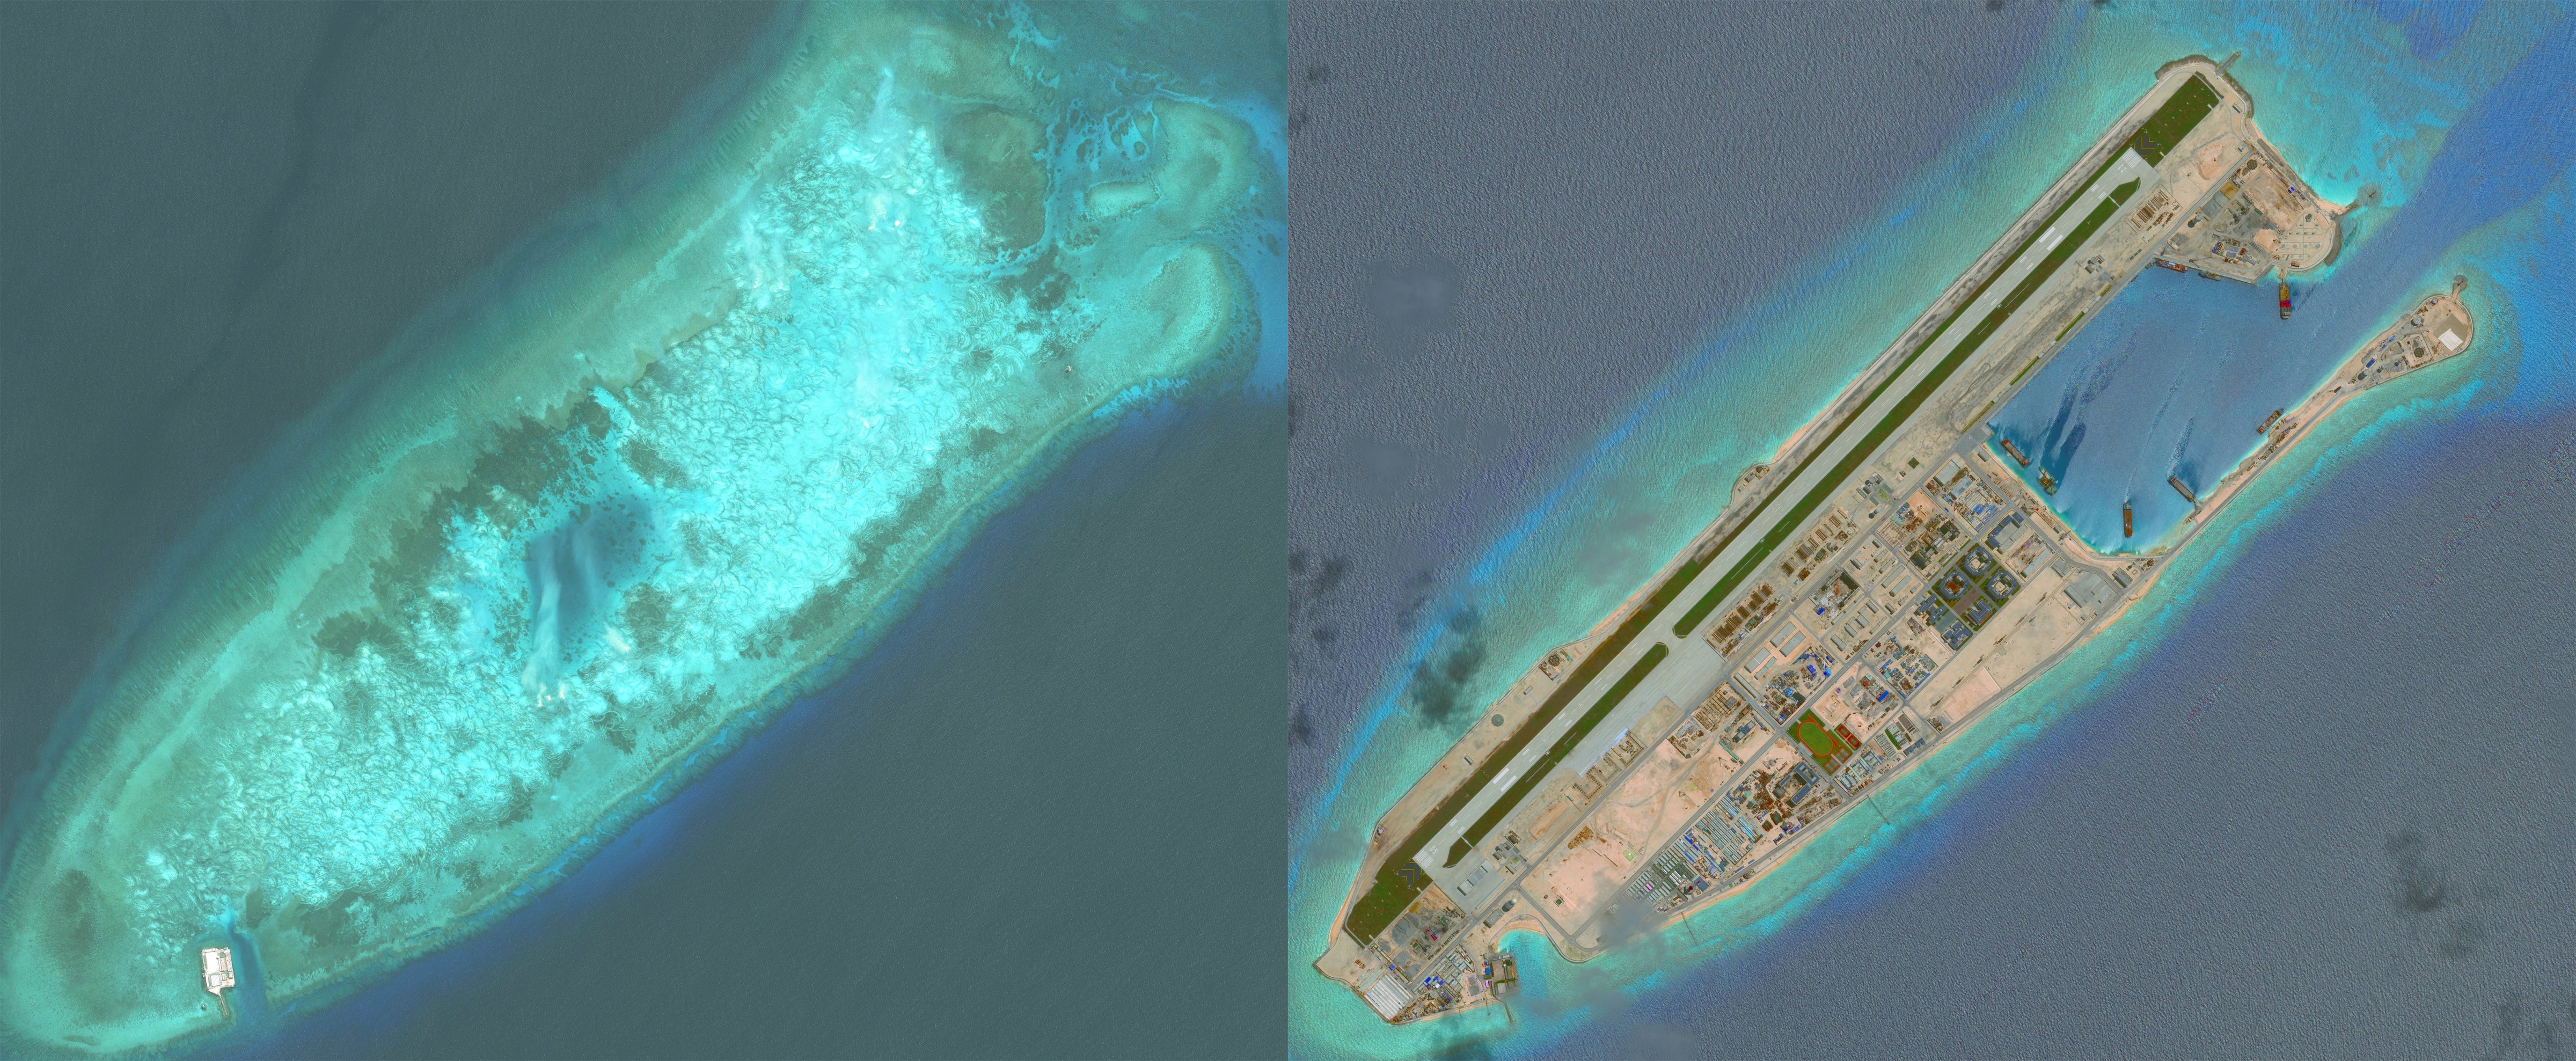 DigitalGlobe overview imagery comparing Fiery Cross Reef from May 31, 2014, to June 3, 2016. Fiery Cross is located in the western part of the Spratly Islands group. (DigitalGlobe/Getty Images)